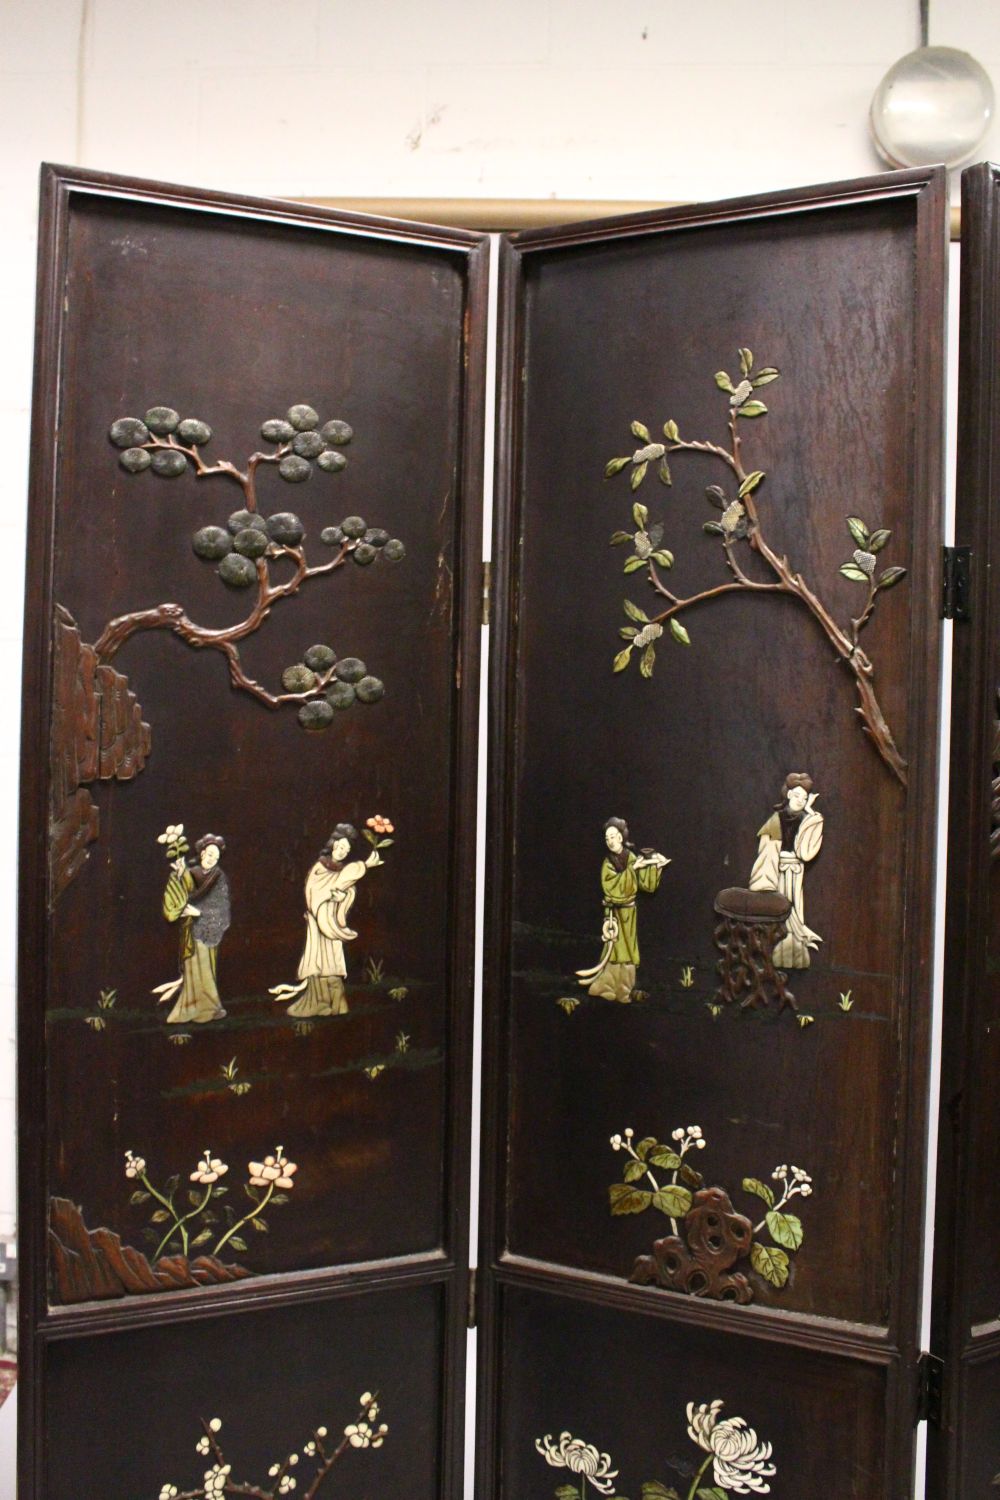 A 19TH CENTURY CHINESE HARDWOOD AND INLAID FOUR FOLD SCREEN, each panel inlaid with carved bone - Image 2 of 9